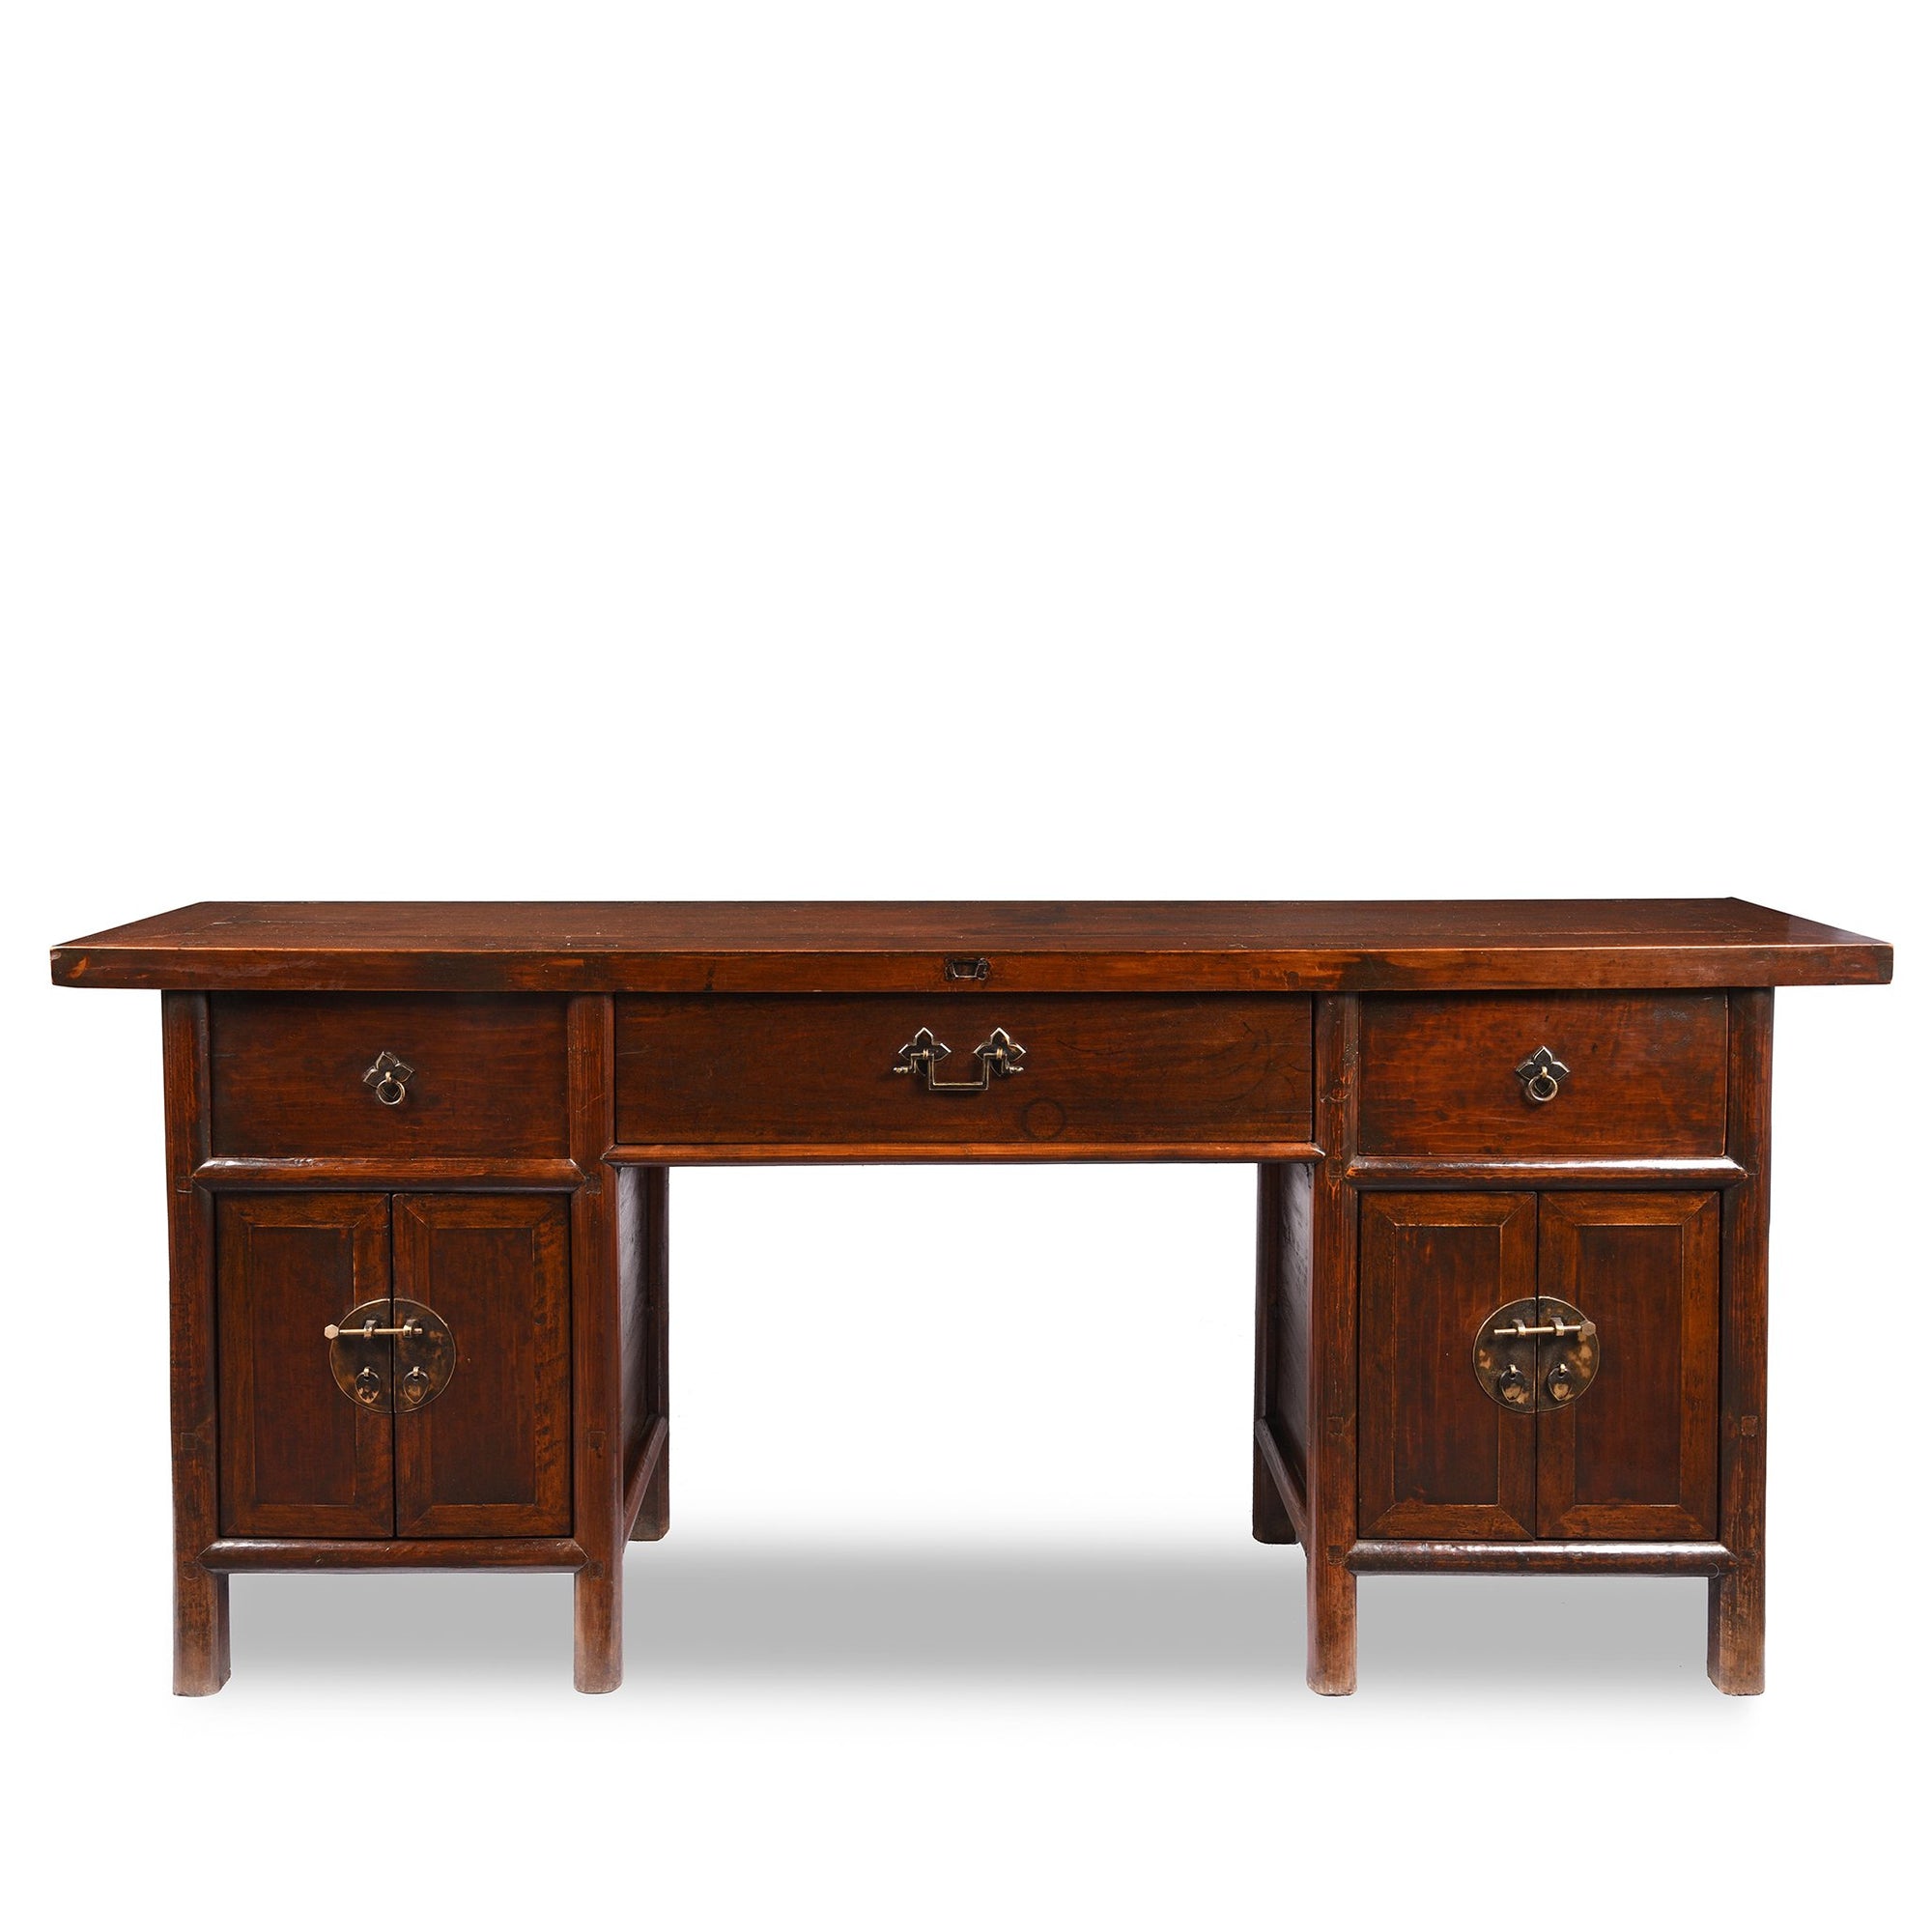 3 Drawer Walnut Altar Table From China - 19thC | Indigo Oriental Antiques